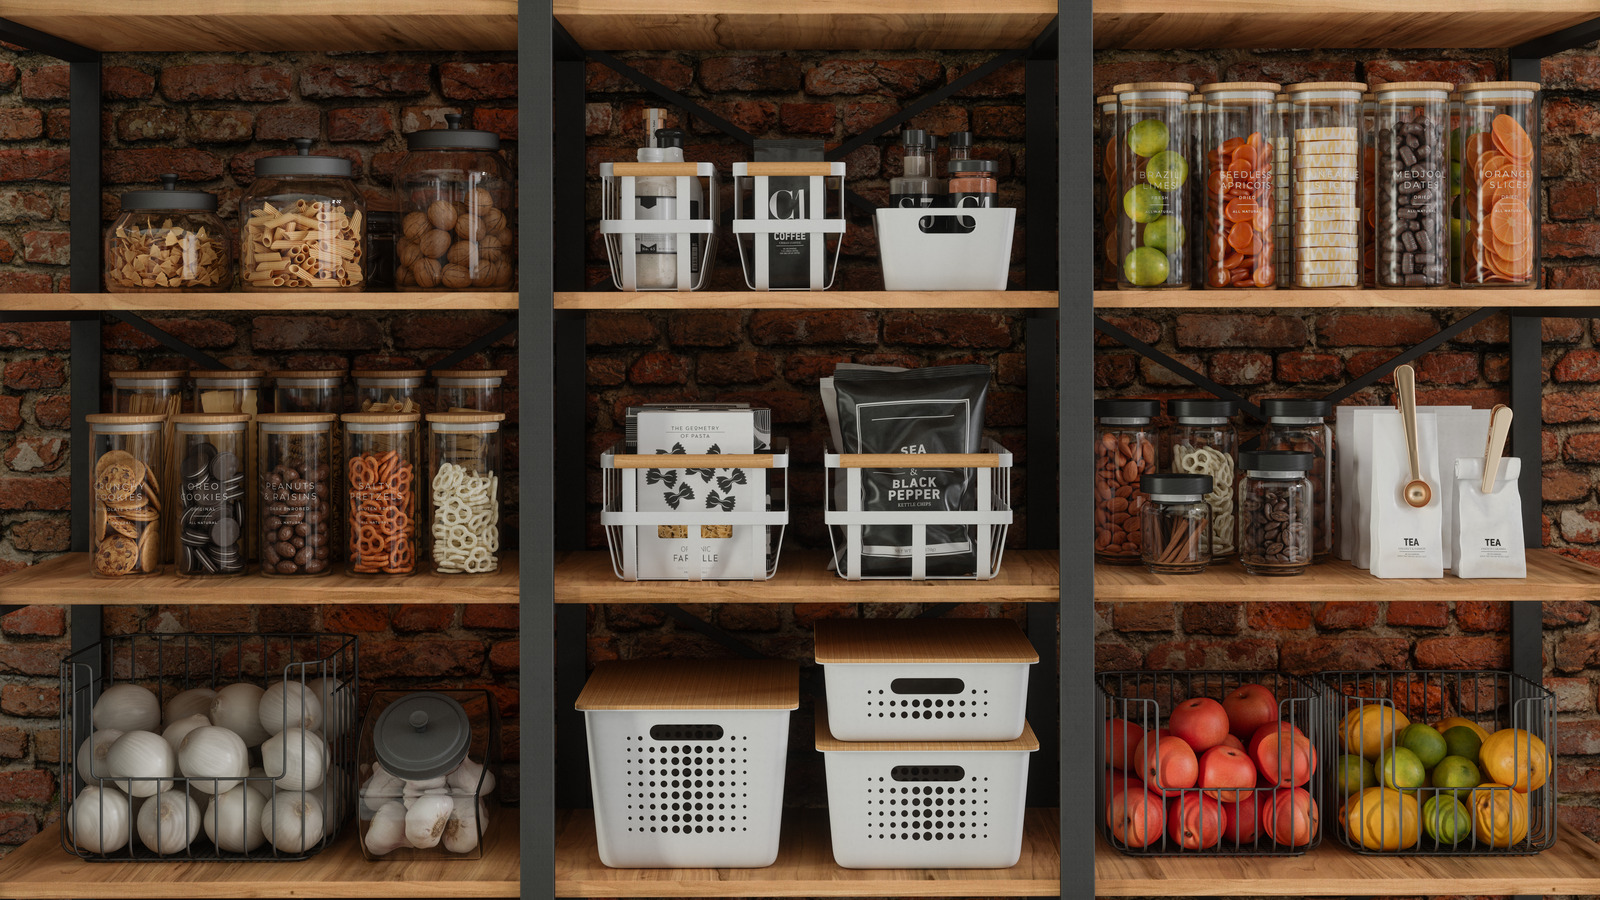 Pantry Organization Just Got Even Better With This Dollar Tree Basket Hack